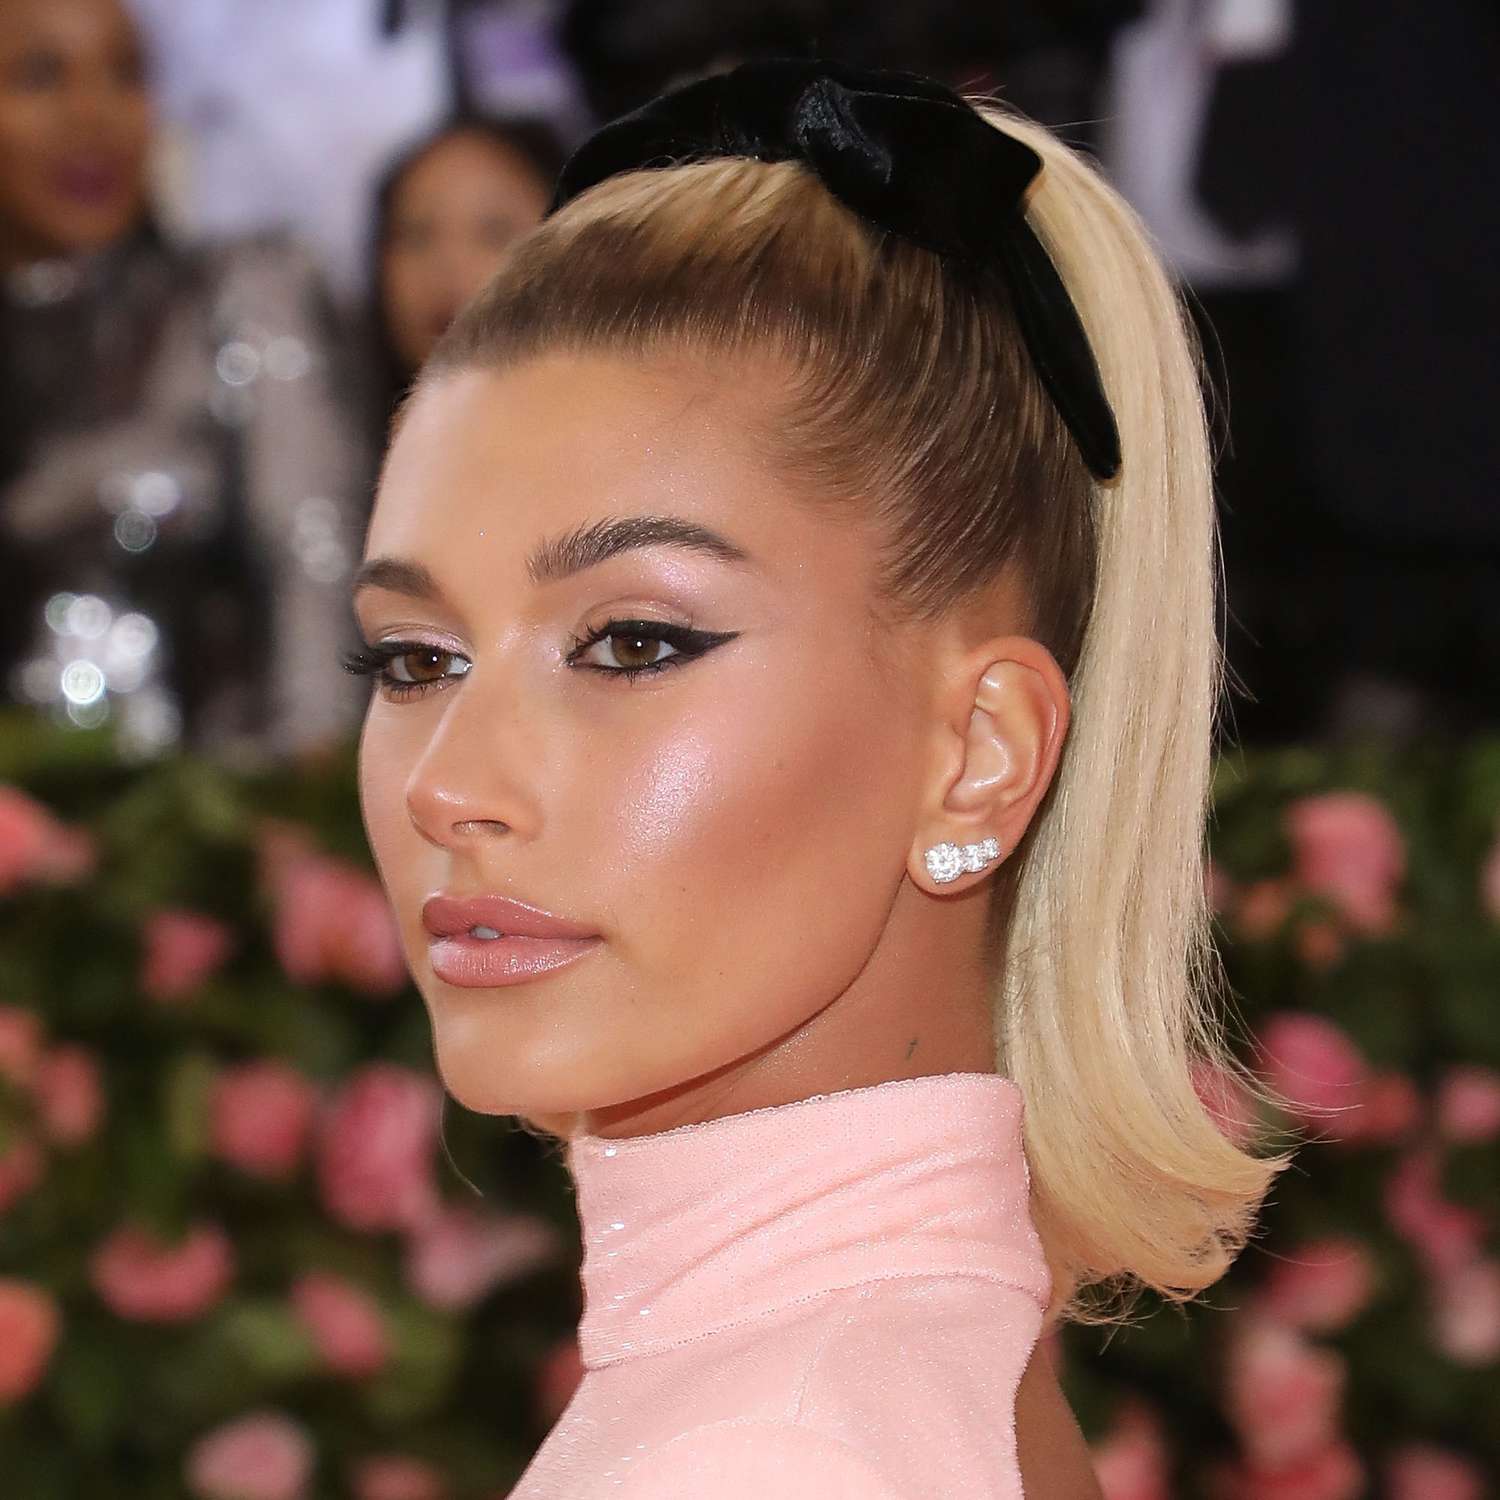 Hailey Bieber wears a ponytail hairstyle with flipped ends and black bow to the Met Gala